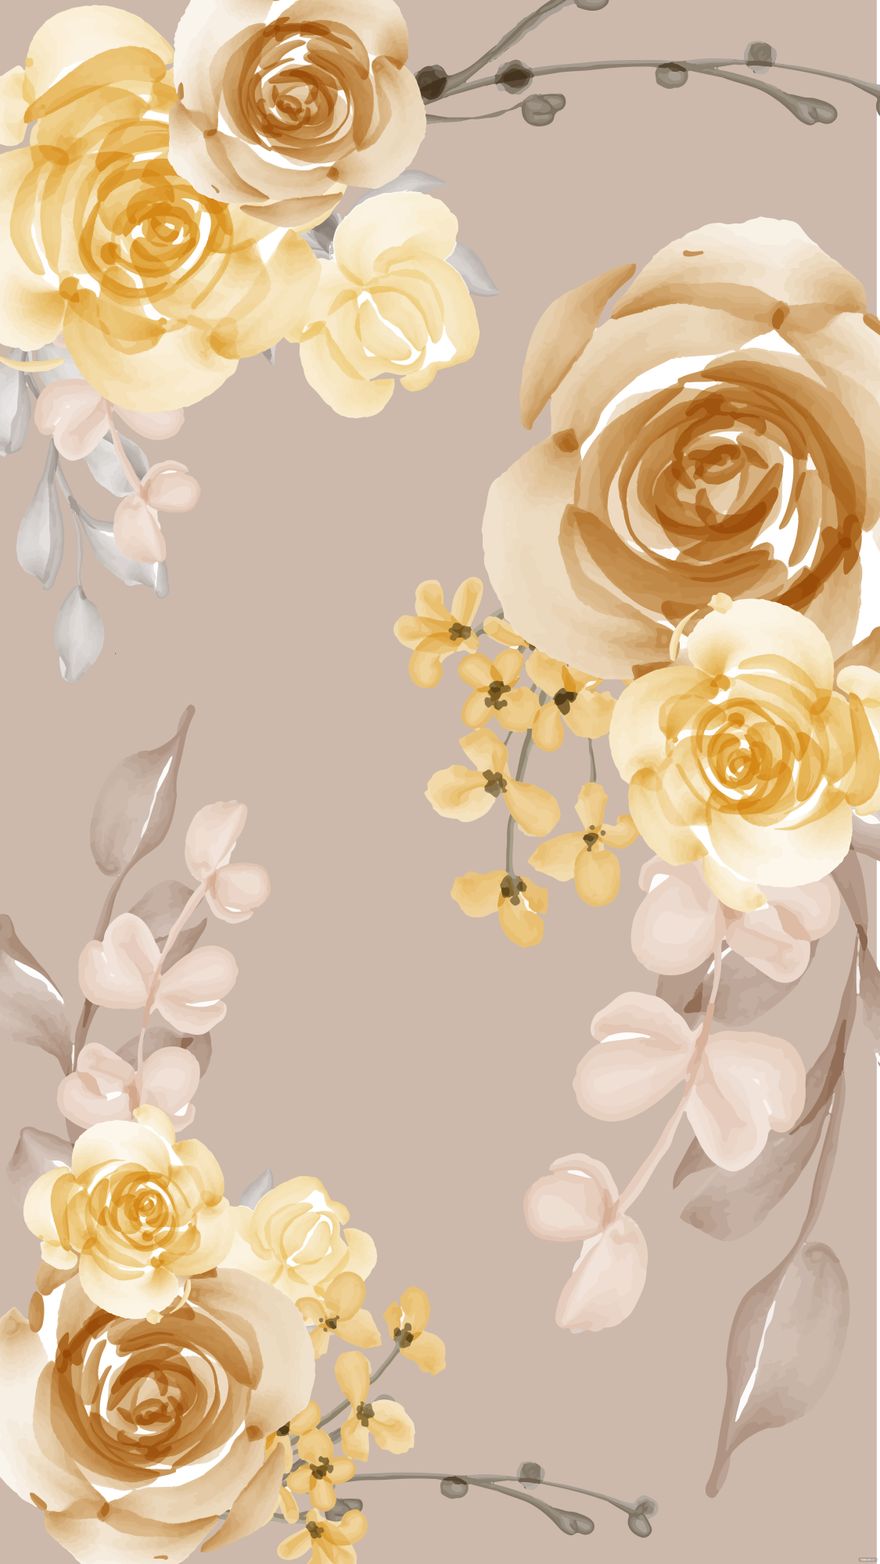 Free Vintage Floral Background For iPhone